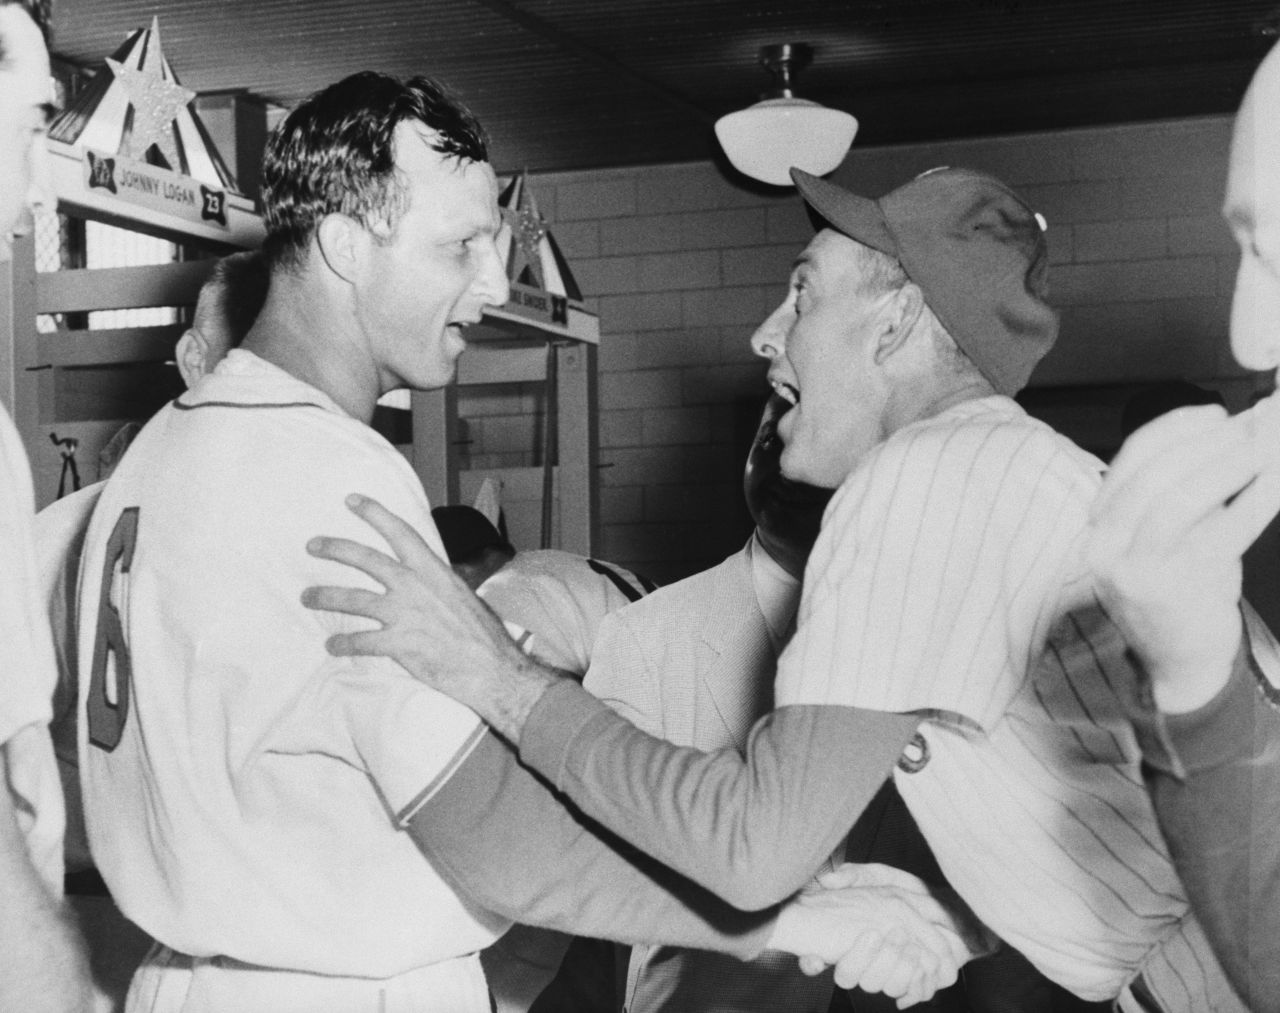 Stan Musial, left, is congratulated by National League manager Mayo Smith after hitting a walk-off home run to win the All-Star Game in 1955.